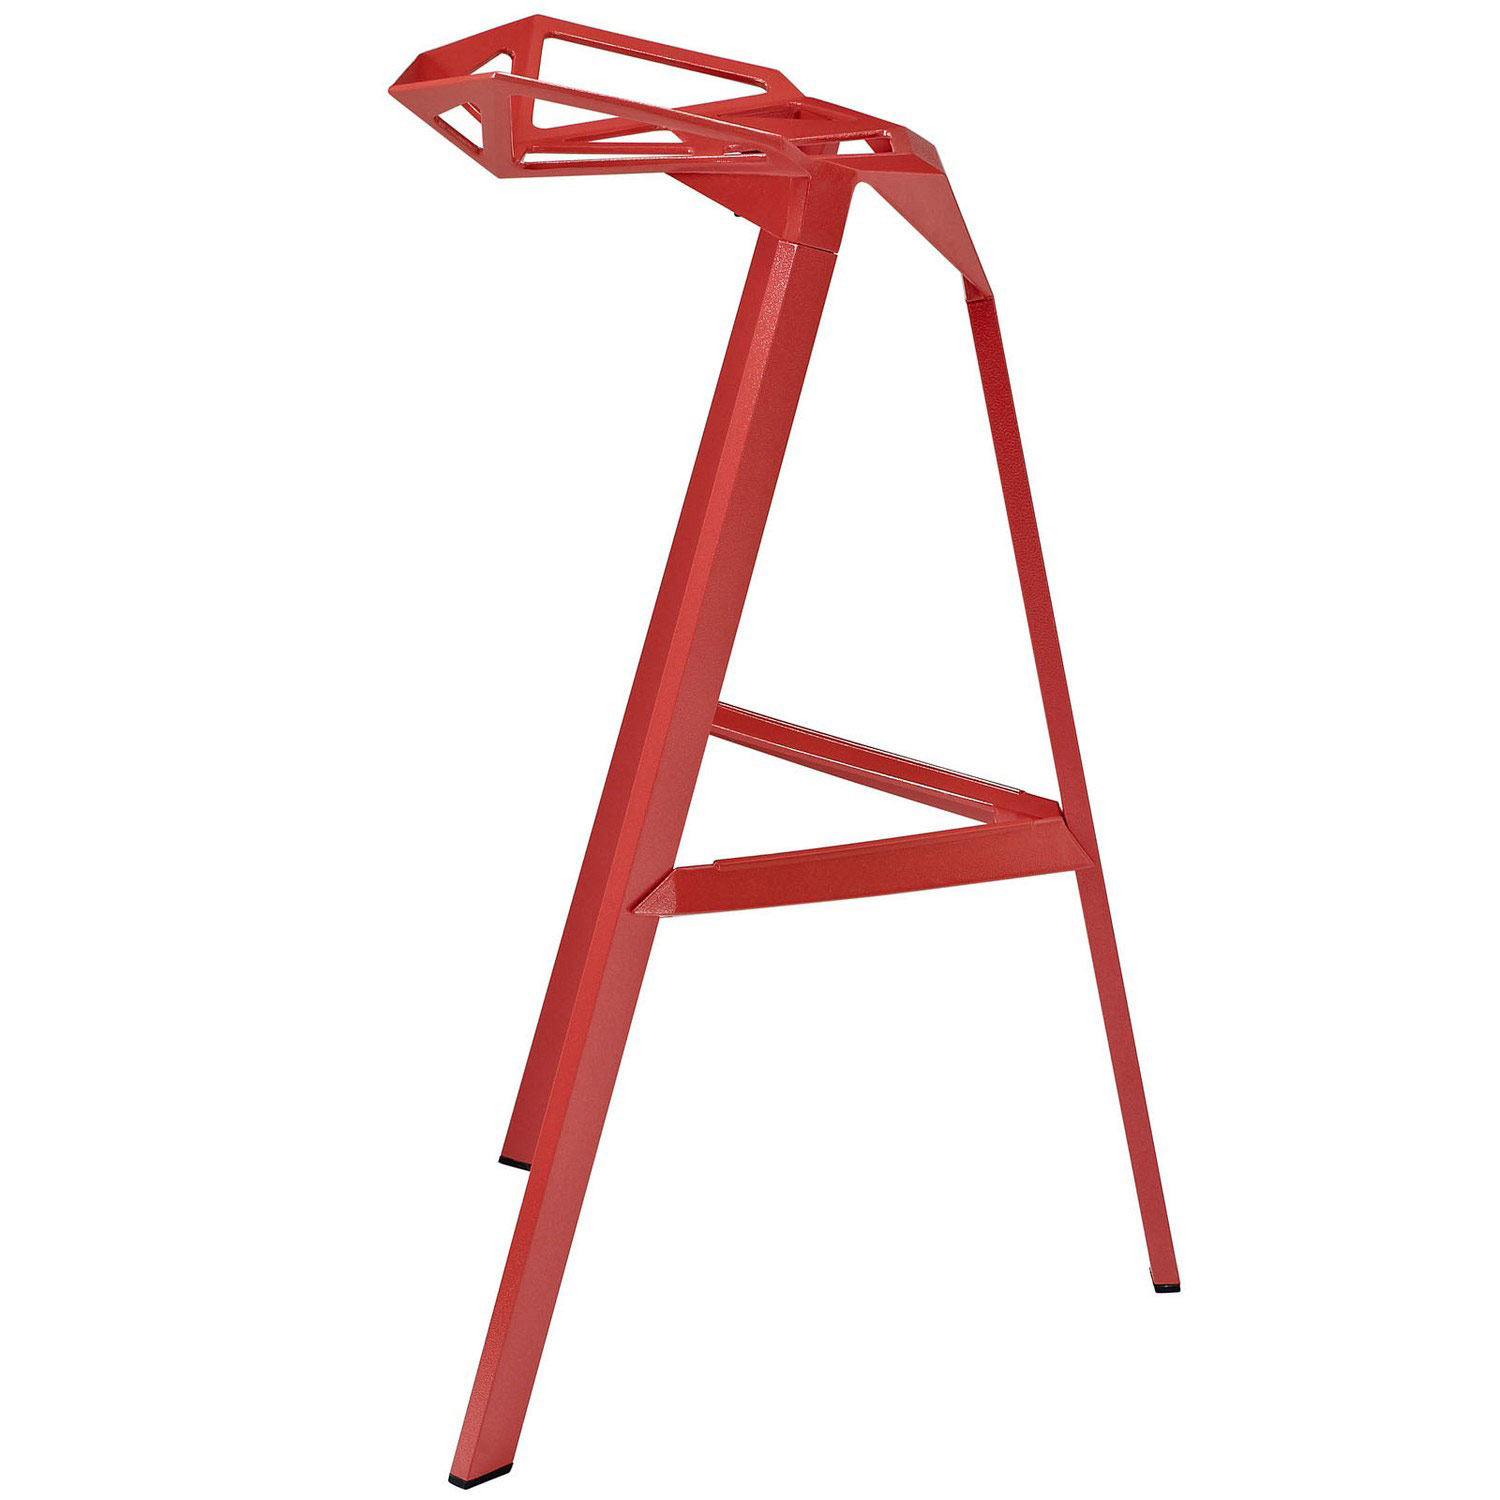 Modway Launch Stacking Bar Stool Set of 2 - Red